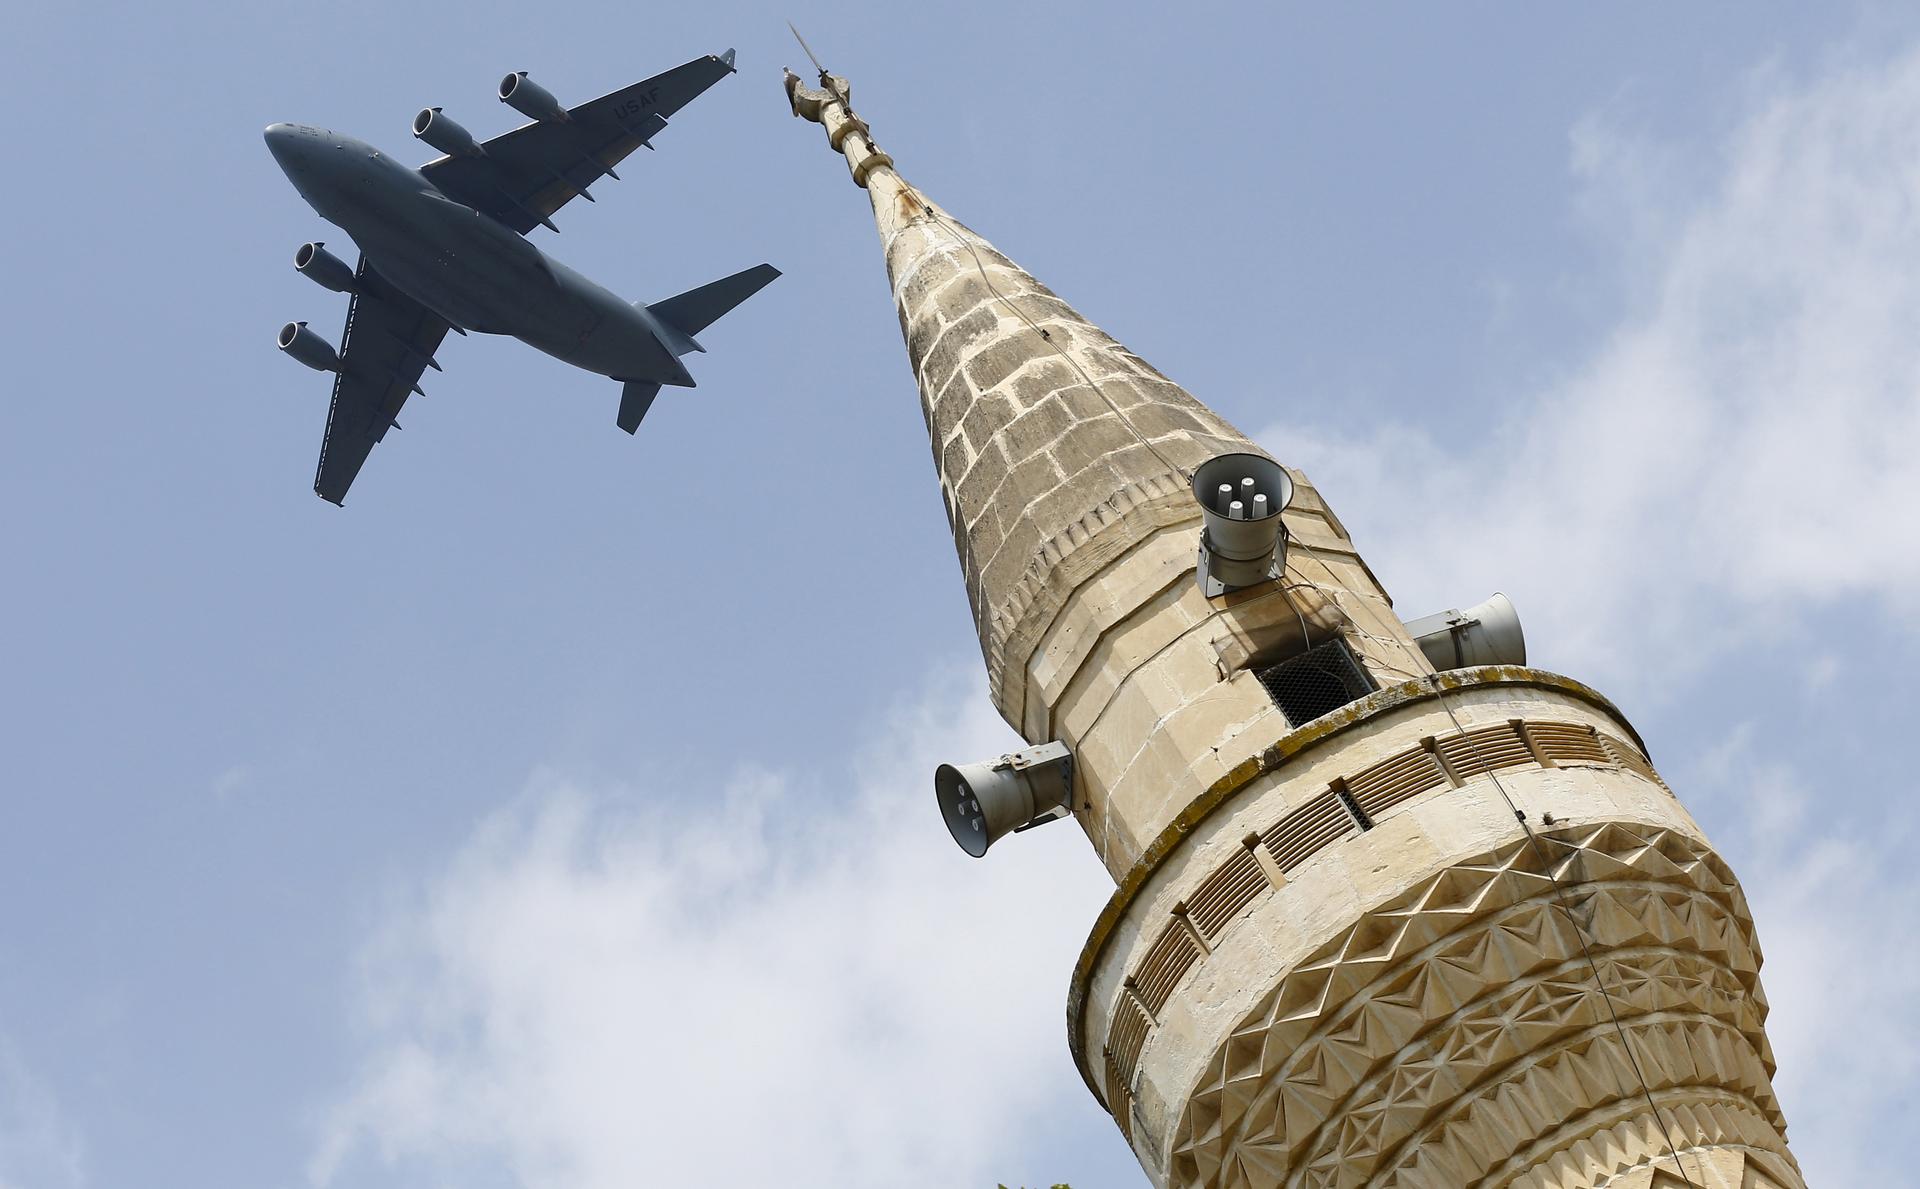 A US Air Force transport aircraft flies over a minaret after taking off from Incirlik air base in Adana, Turkey, in August 2015. After the attempted coup, operations at the air base were halted.